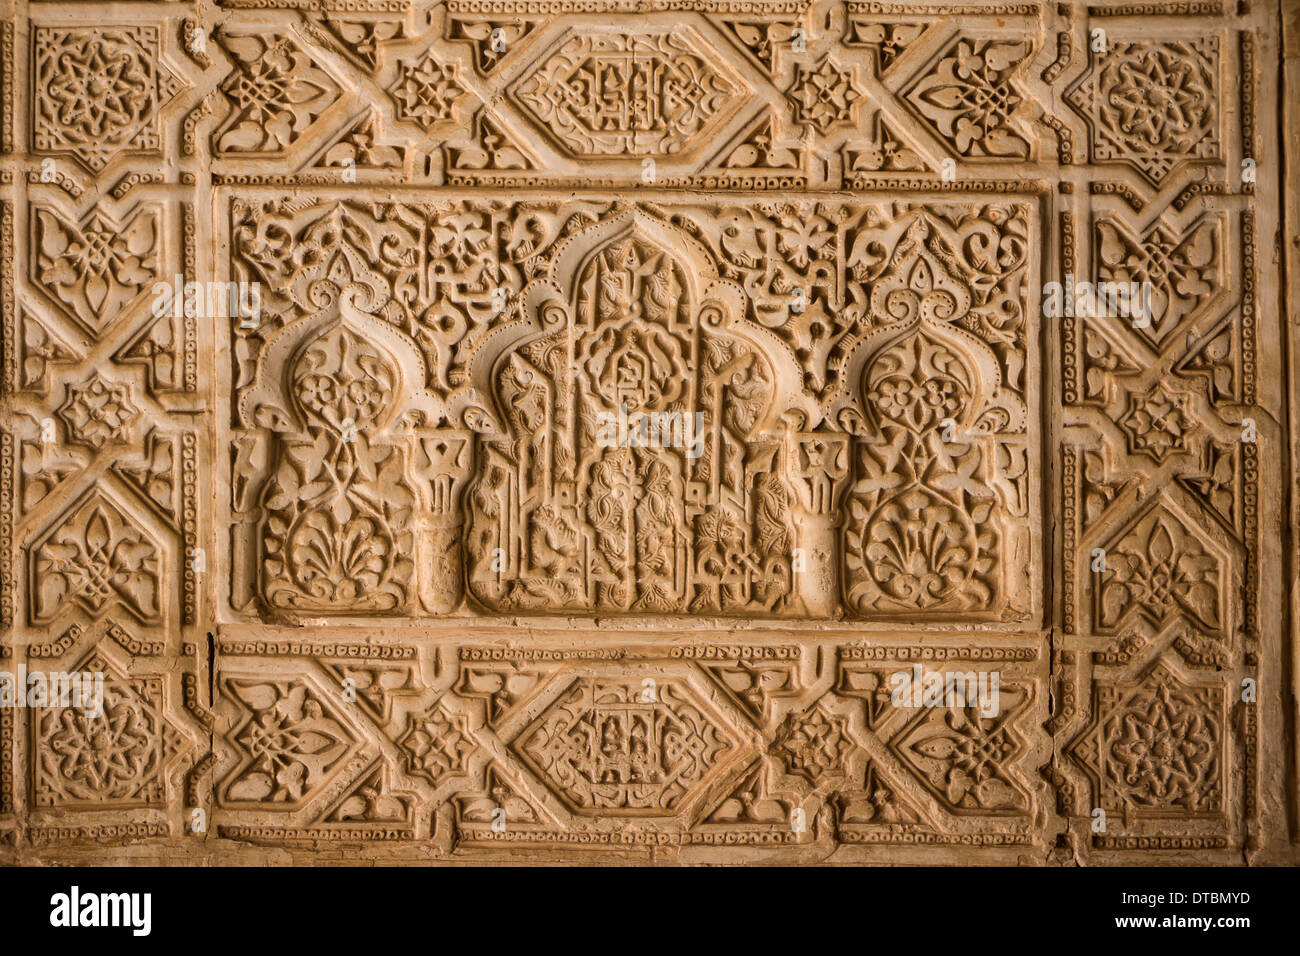 One of the many ornate carvings at the beautiful palace and gardens at Alhambra in Granada, Andalusia, southern Spain. Stock Photo